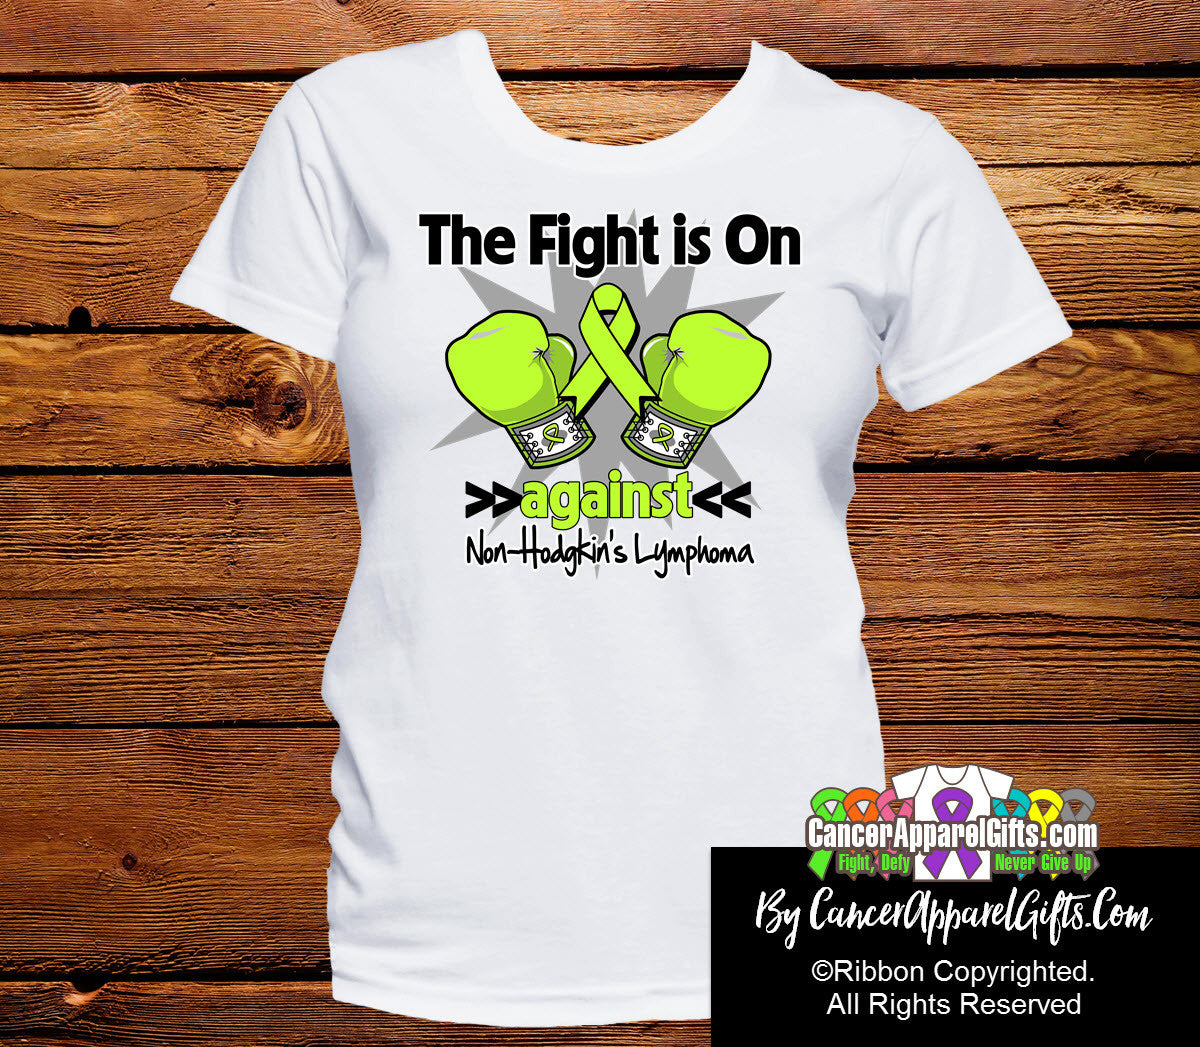 Non-Hodgkins Lymphoma The Fight is On Ladies Shirts